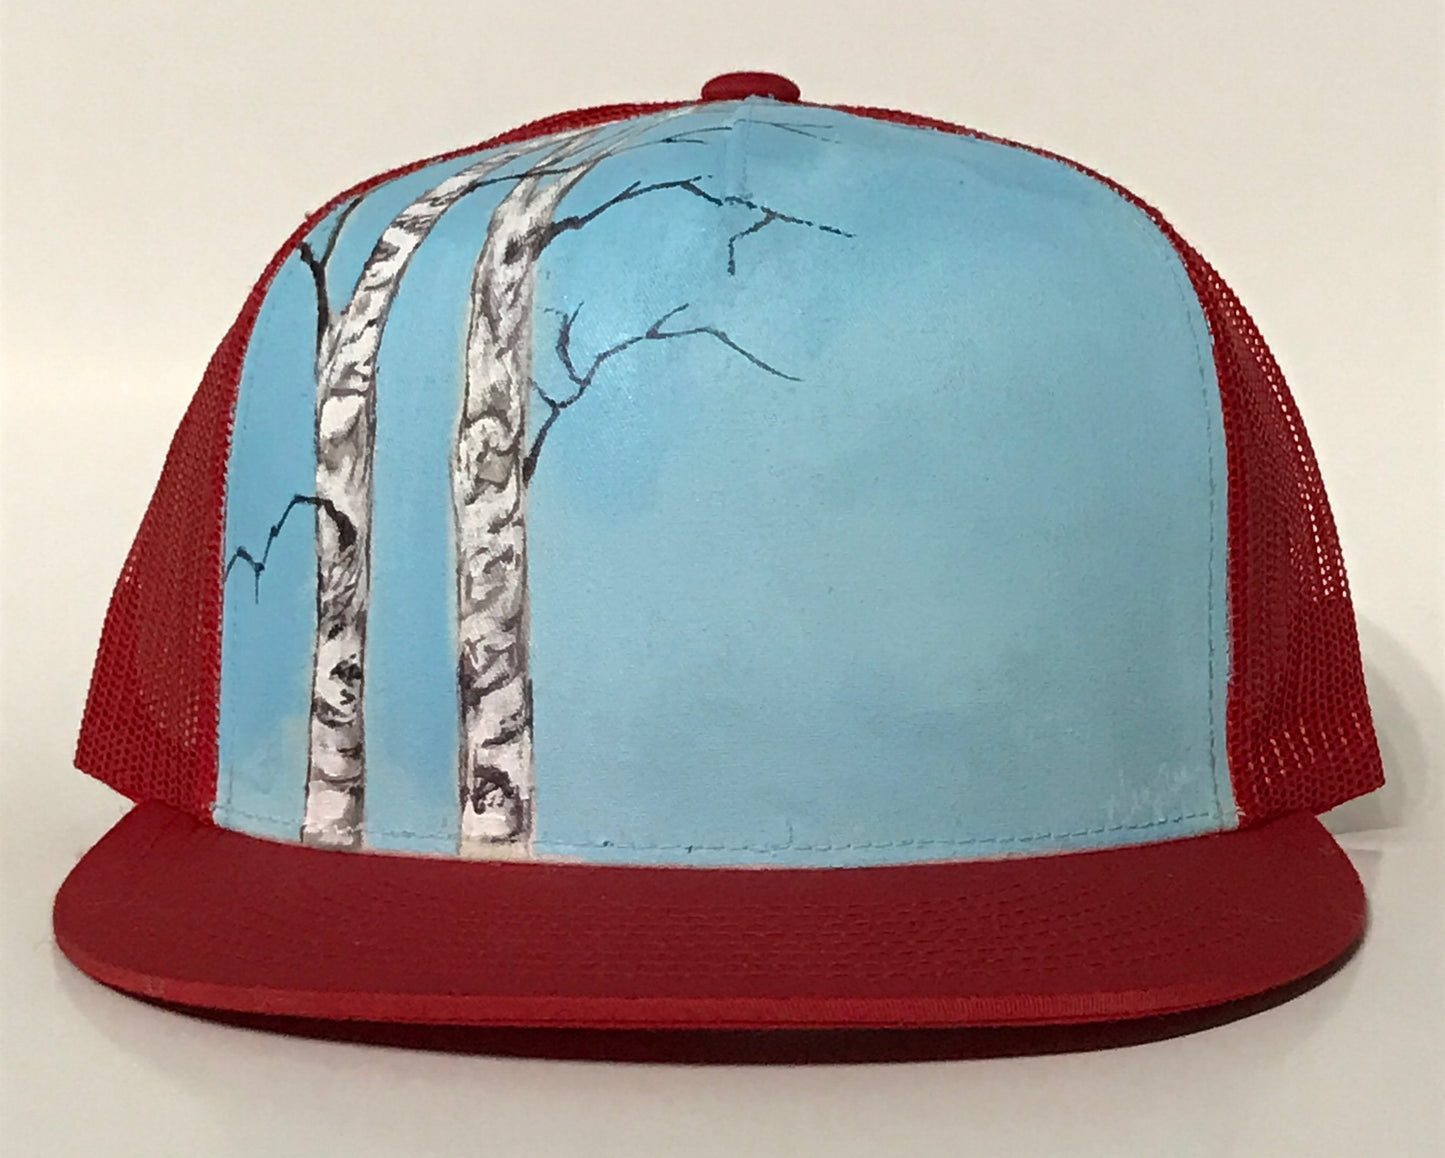 "Two Birches" Hand Painted on Red Snapback Trucker Hat